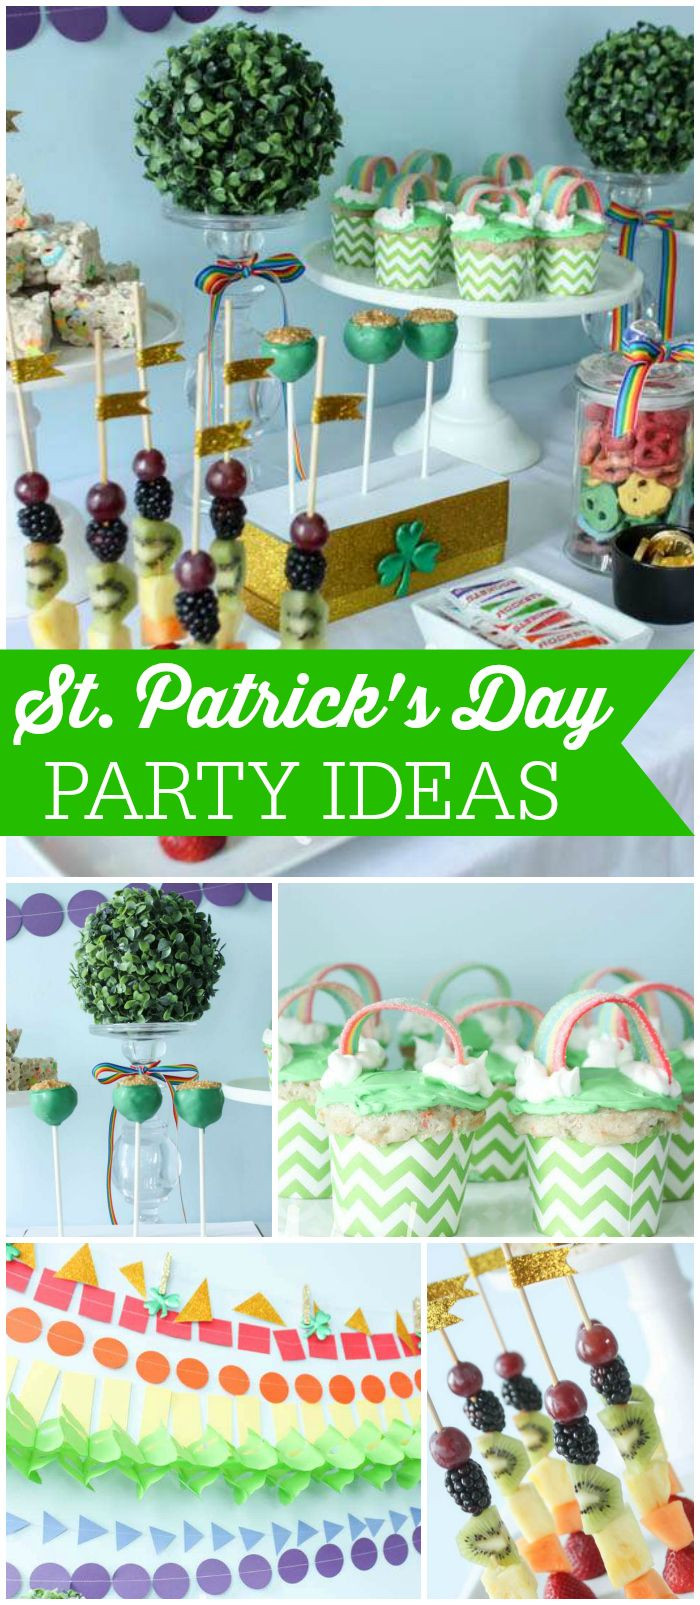 St Patrick's Day Card Ideas
 251 best images about St Patrick s Day Party Ideas on